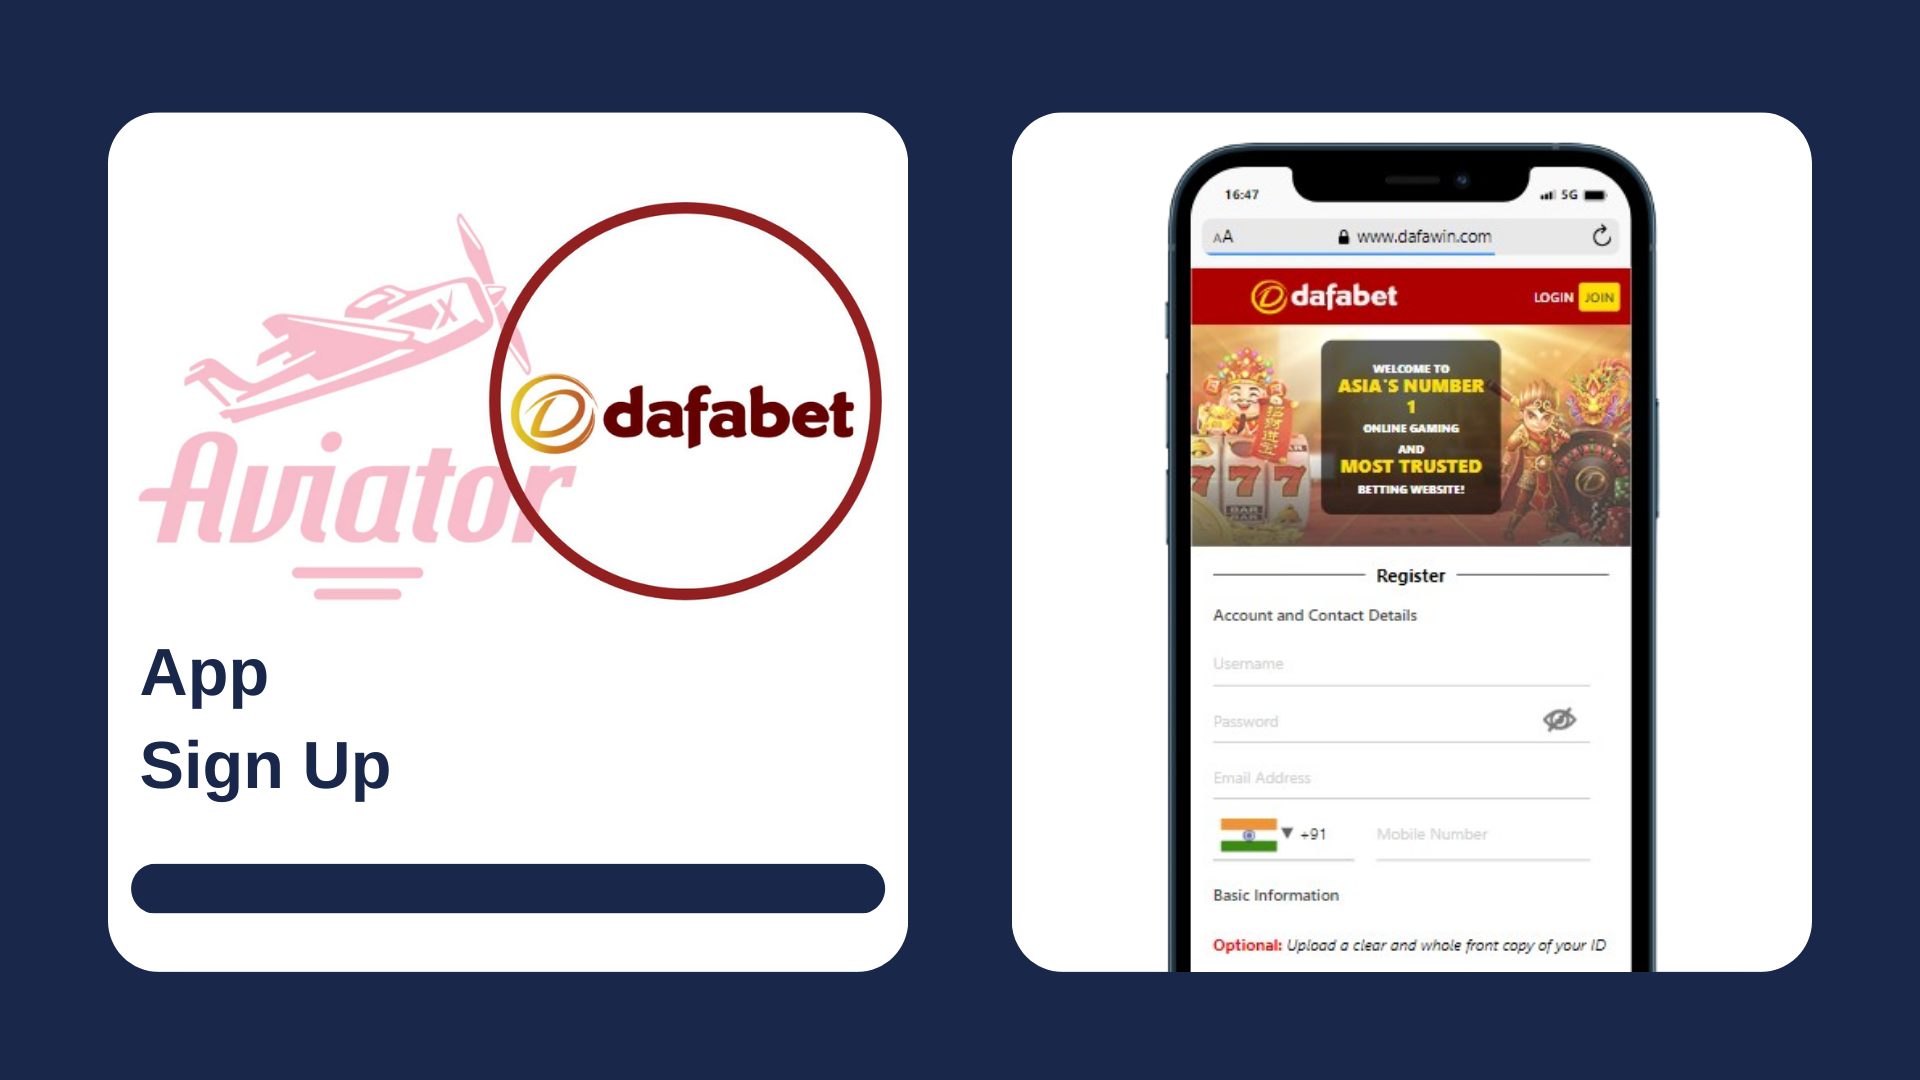 A smartphone showing sign up form of the casino, with Aviator game and Dafabet logos